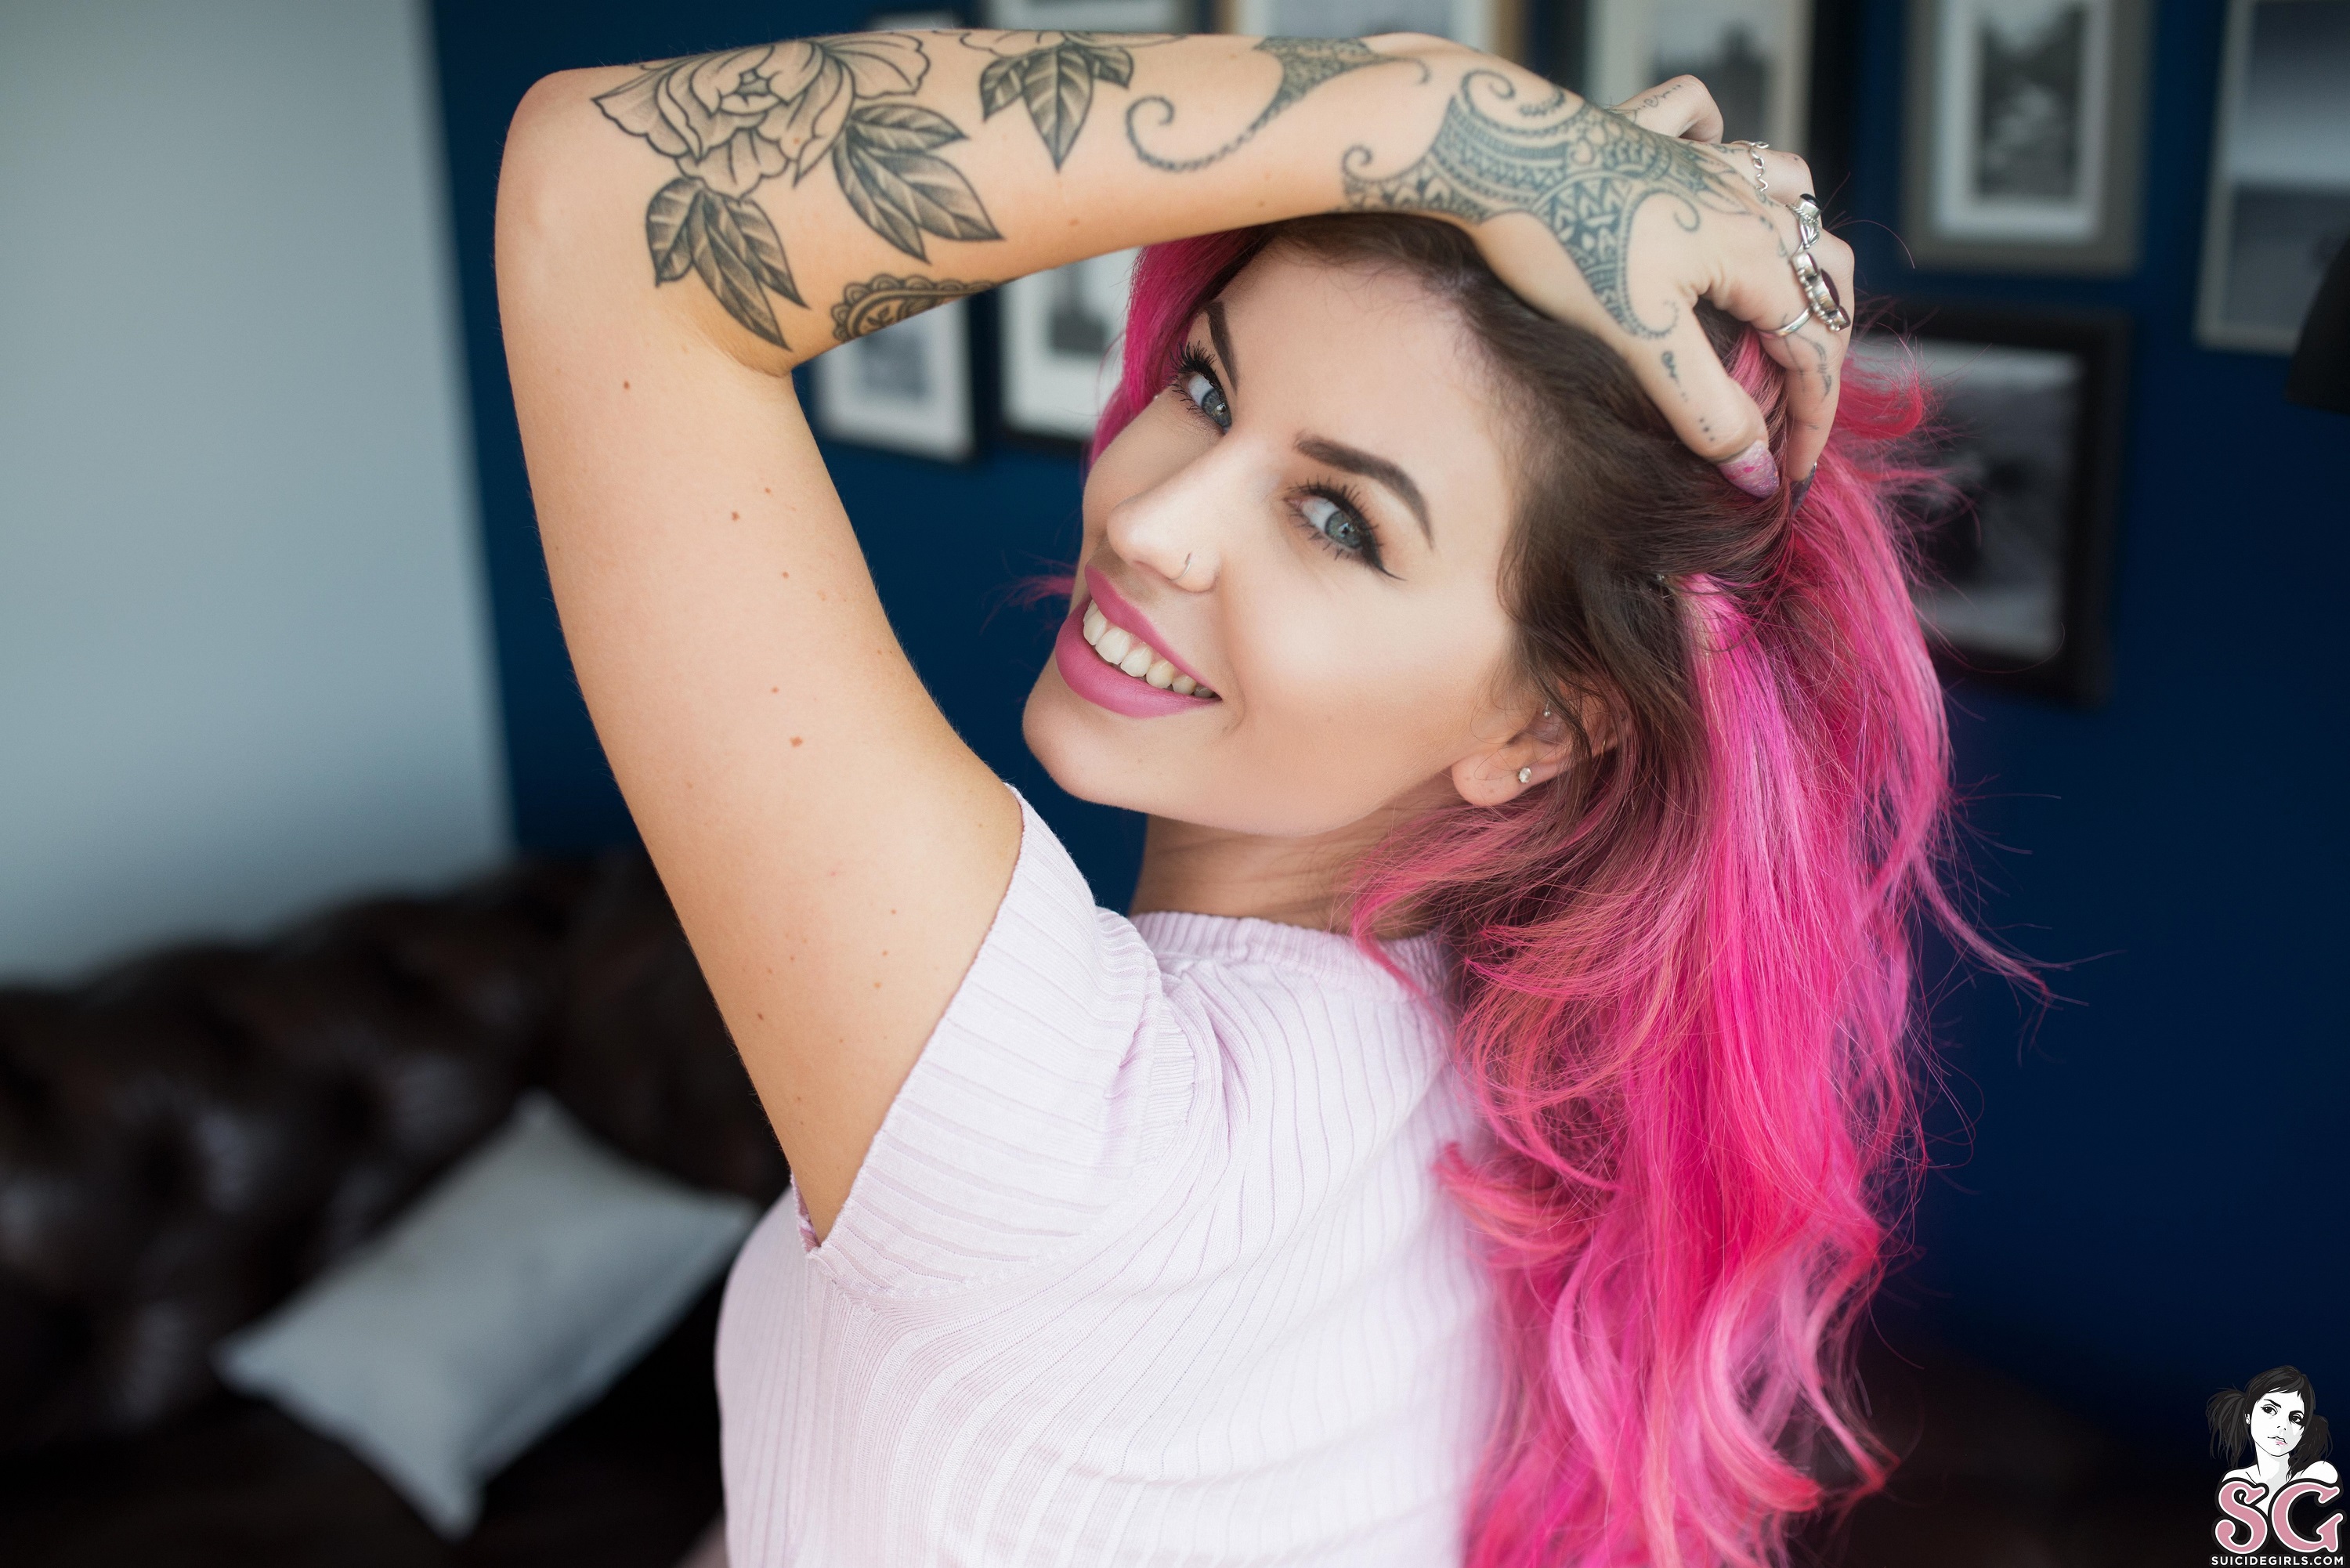 People 3000x2002 Aemelia Suicide women model dyed hair pink hair looking at viewer pink lipstick nose ring smiling portrait hands on head earring face depth of field painted nails tattoo inked girls picture frames couch cushions indoors women indoors Suicide Girls watermarked